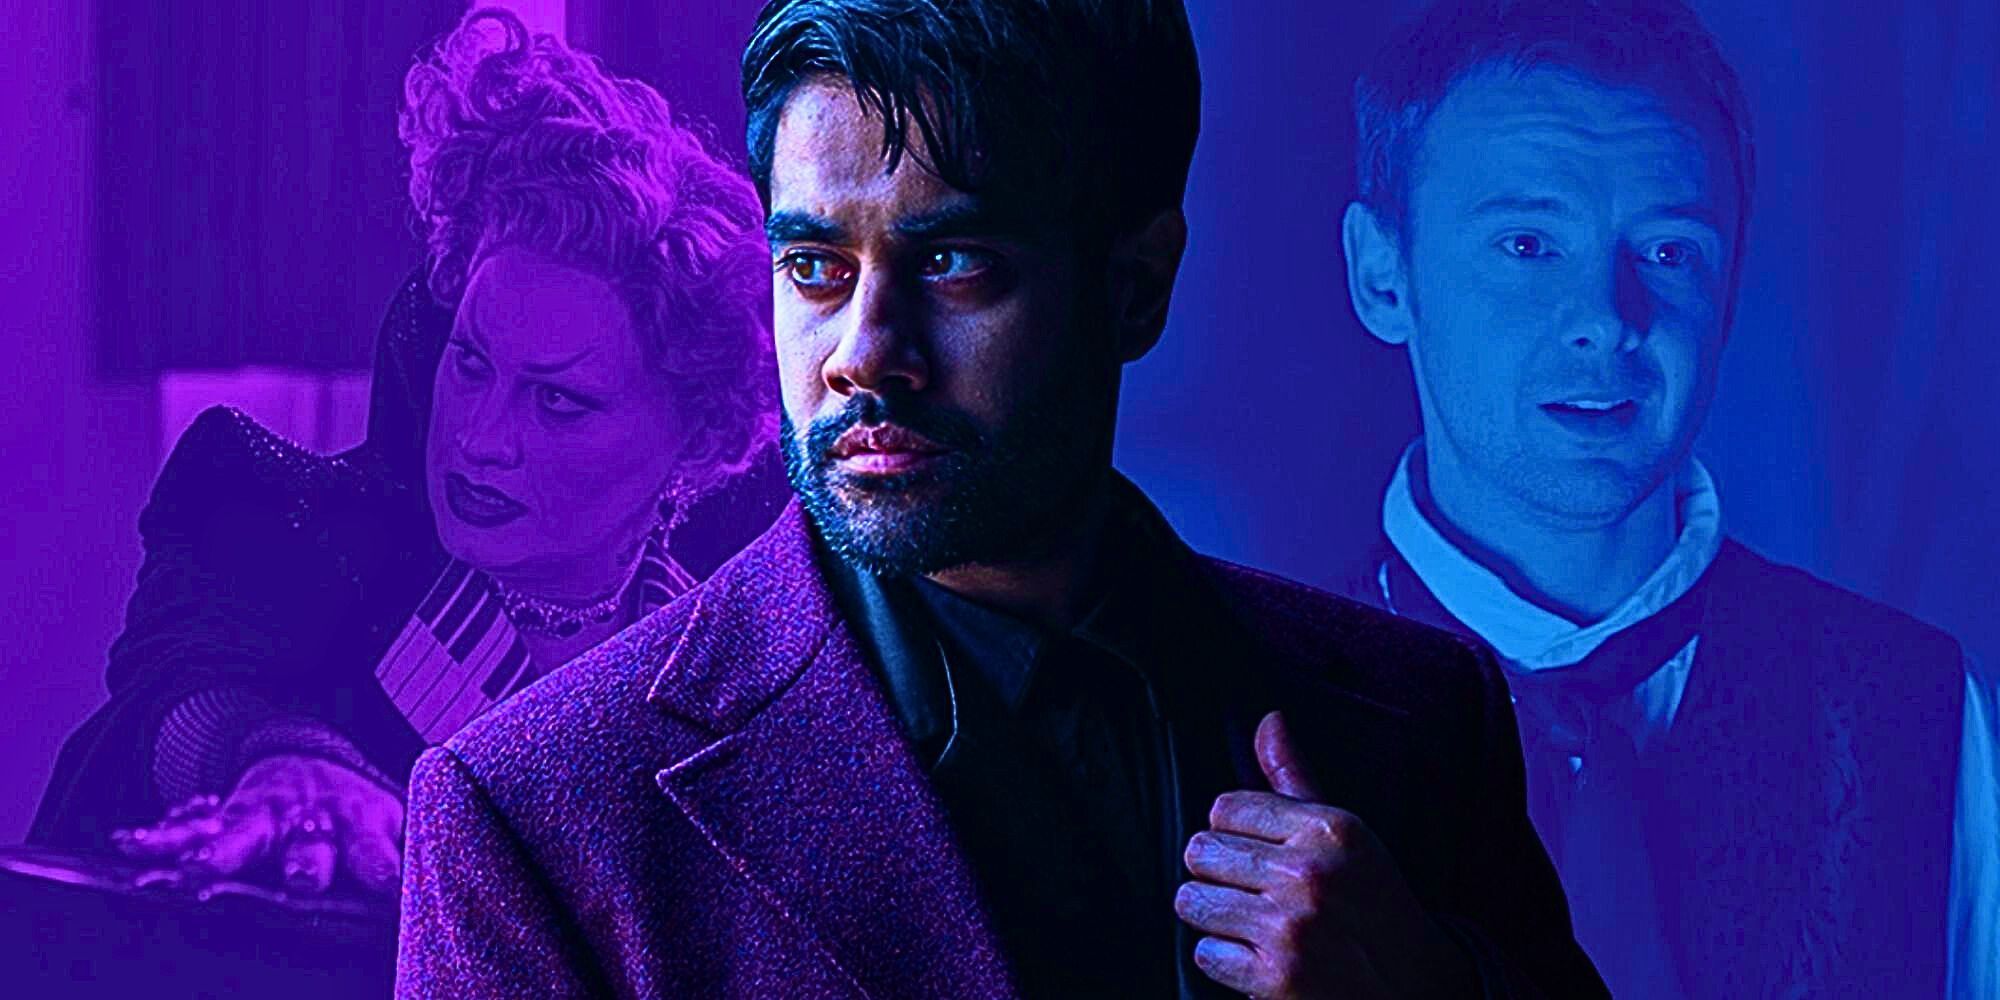 Custom image of Sacha Dhawan as the Master with Jinkx Monsoon's Maestro and John Simm's Master in the background